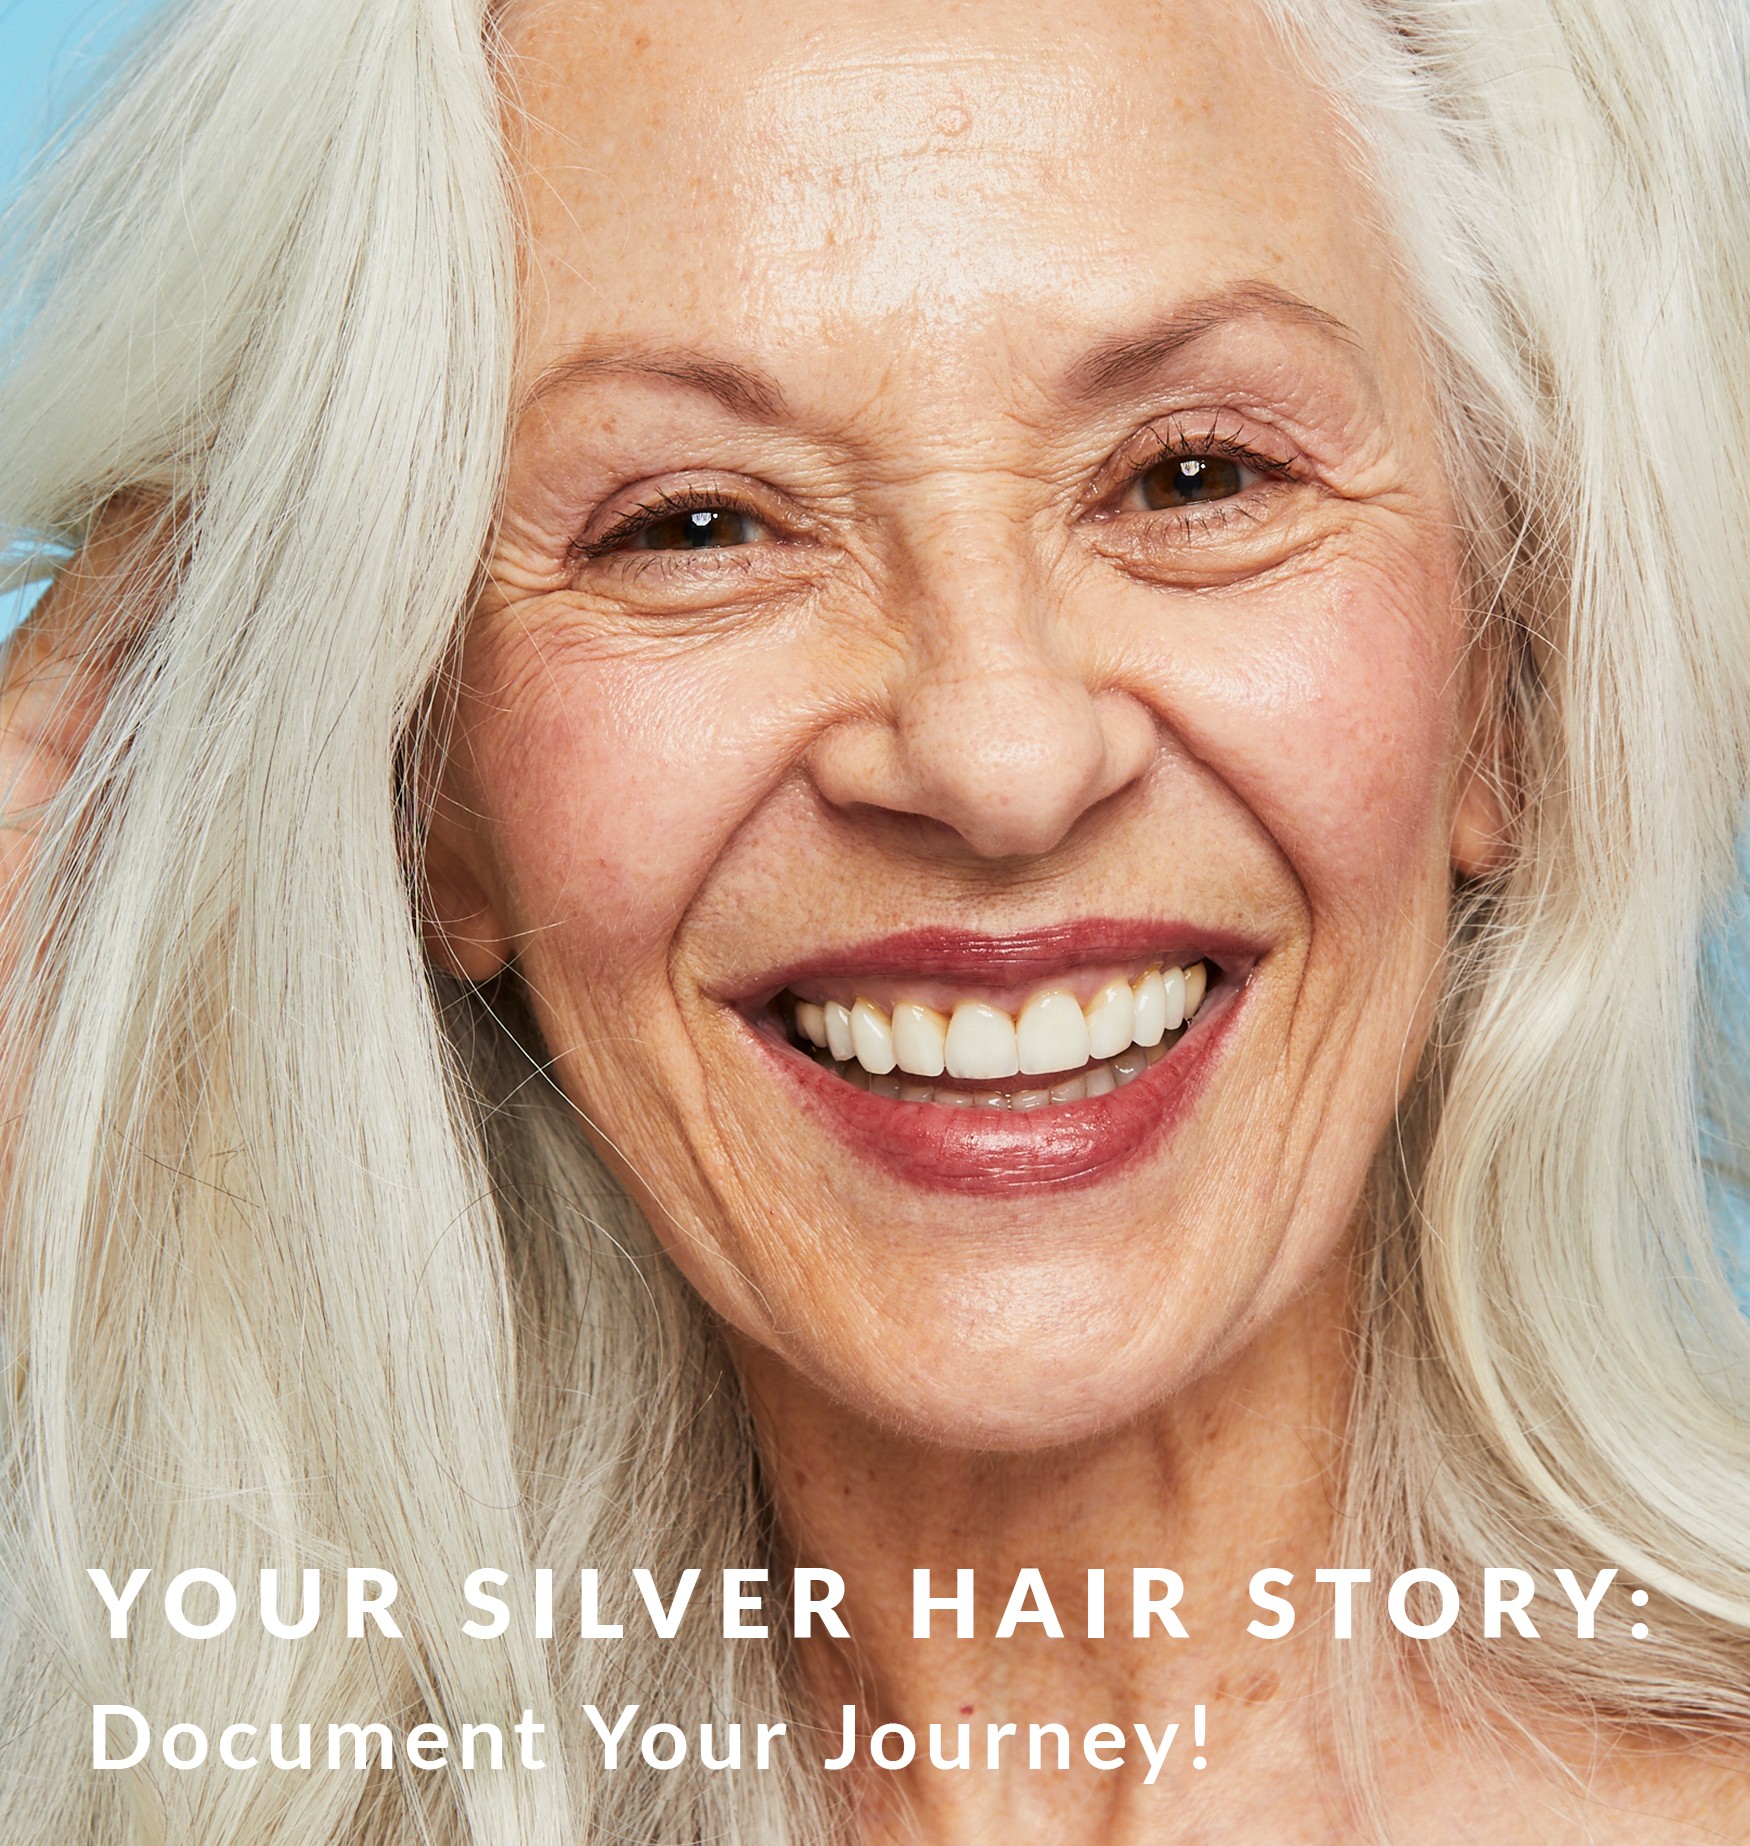 Your Silver Hair Story: Document Your Journey! | BOOM! by Cindy Joseph